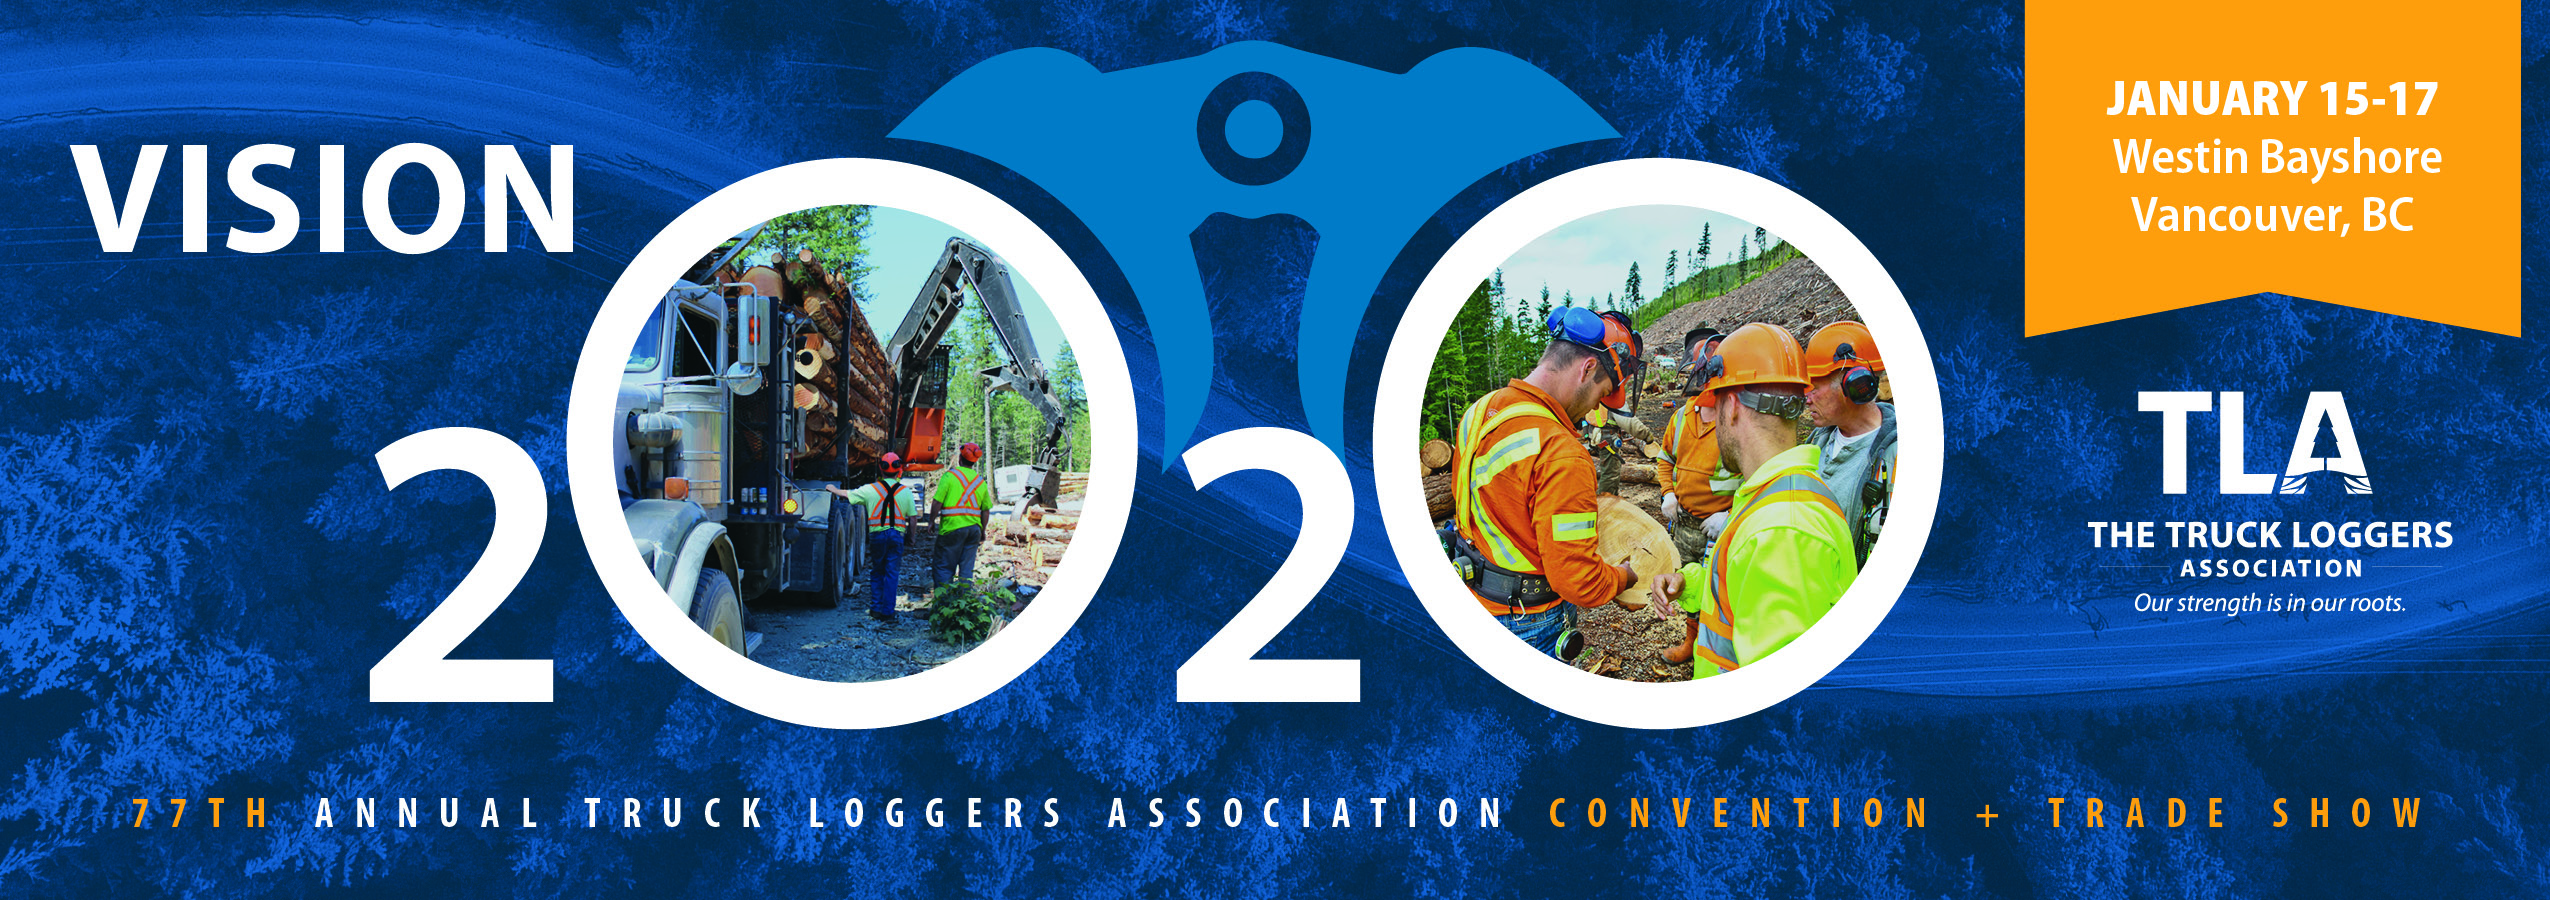 78TH ANNUAL TRUCK LOGGERS ASSOCIATION CONVENTION